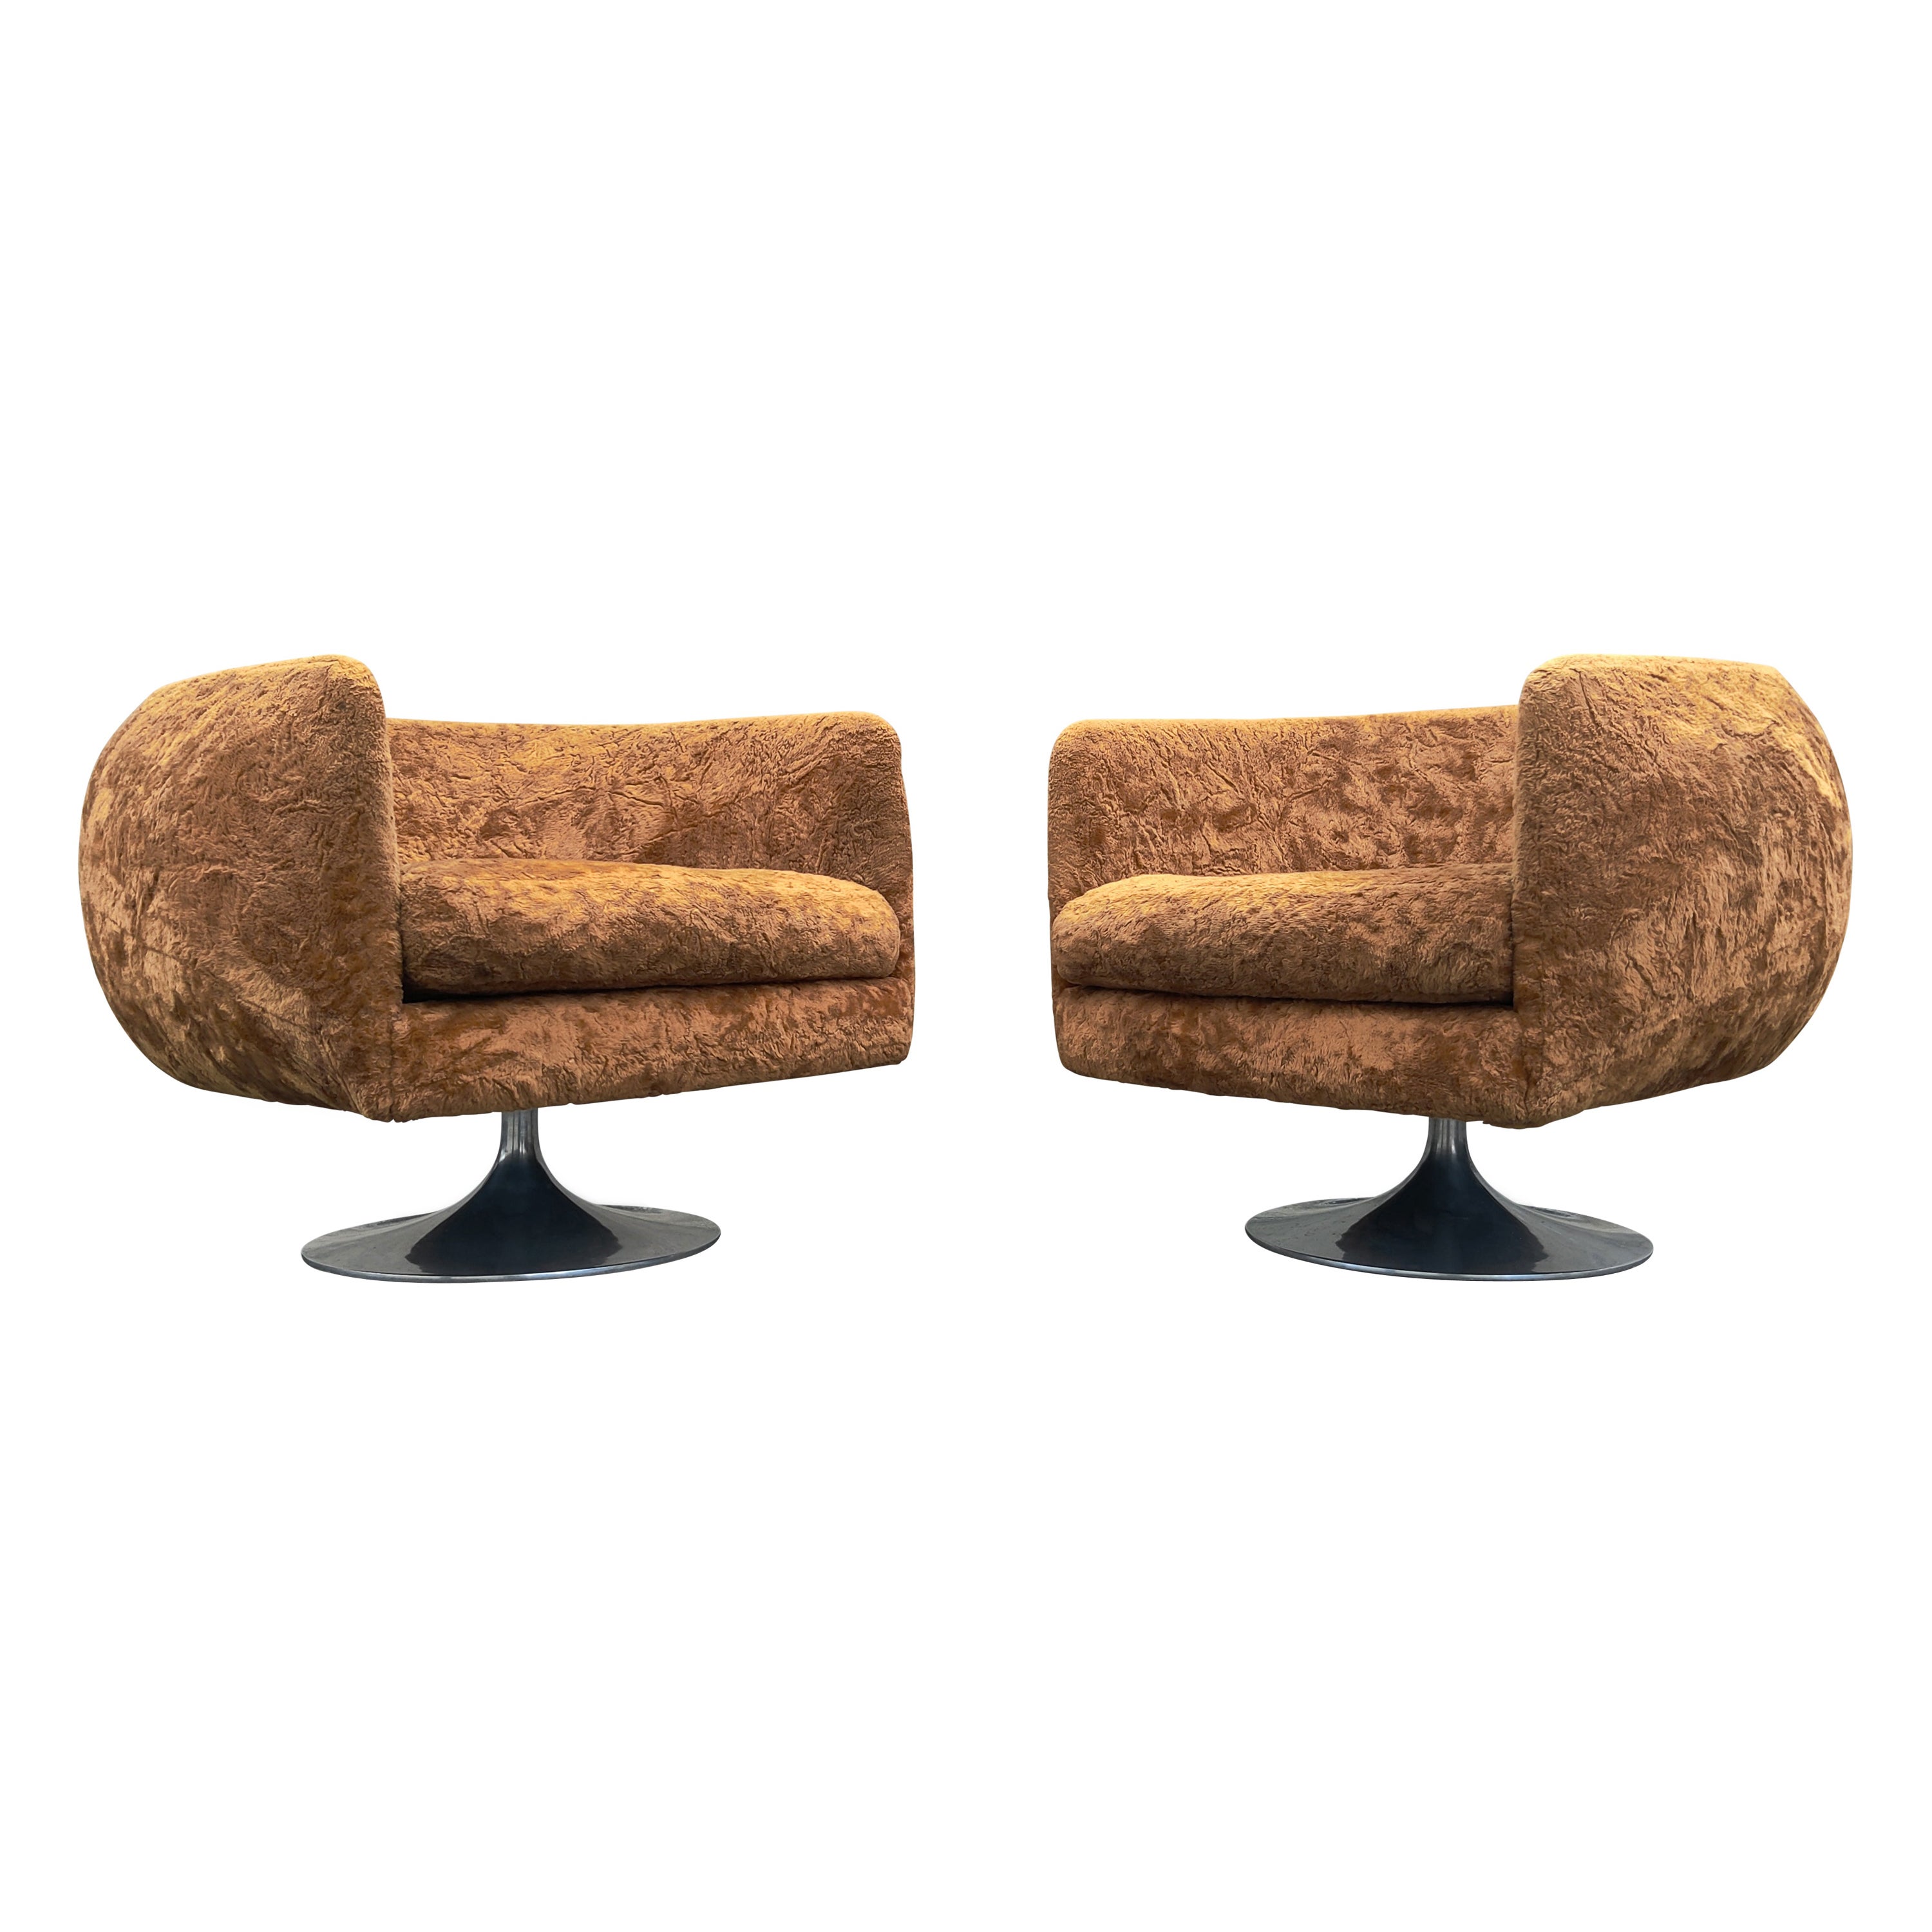 Pair Adrian Pearsall Barrel Form Swivel Chairs Brown Fur Upholstry Tulip Bases